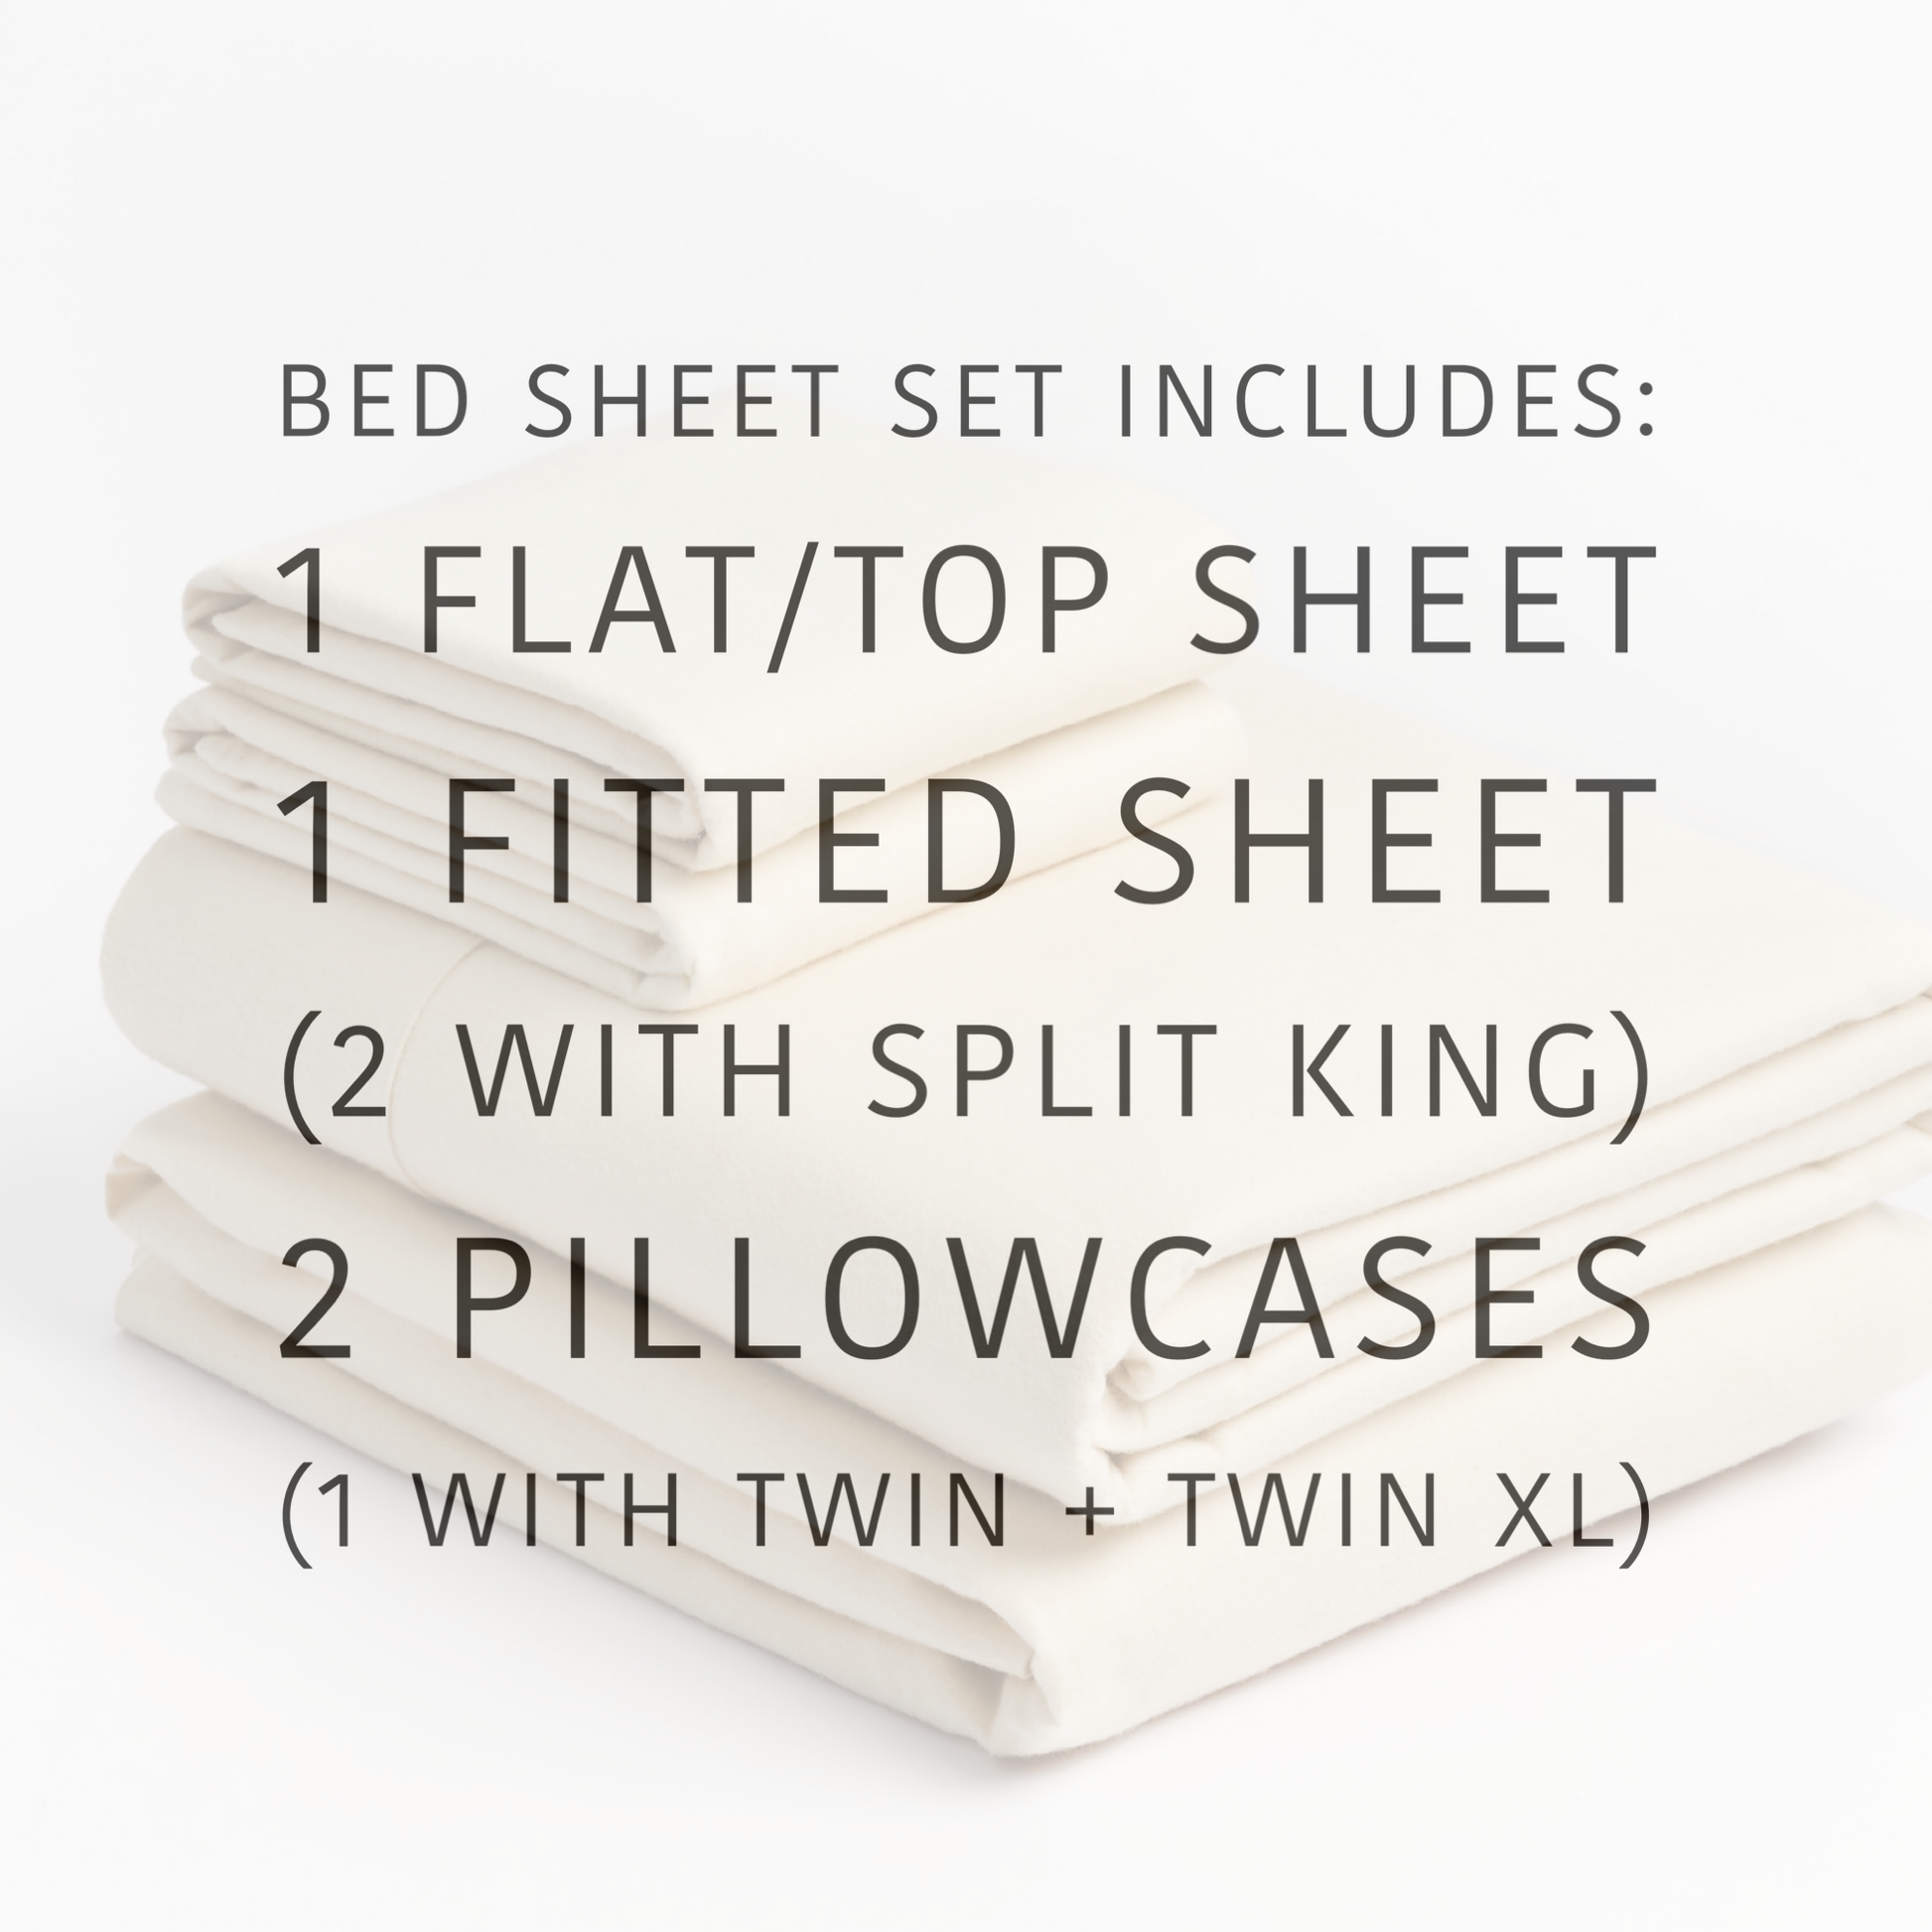 What's included in a Takasa flannel natural sheet set